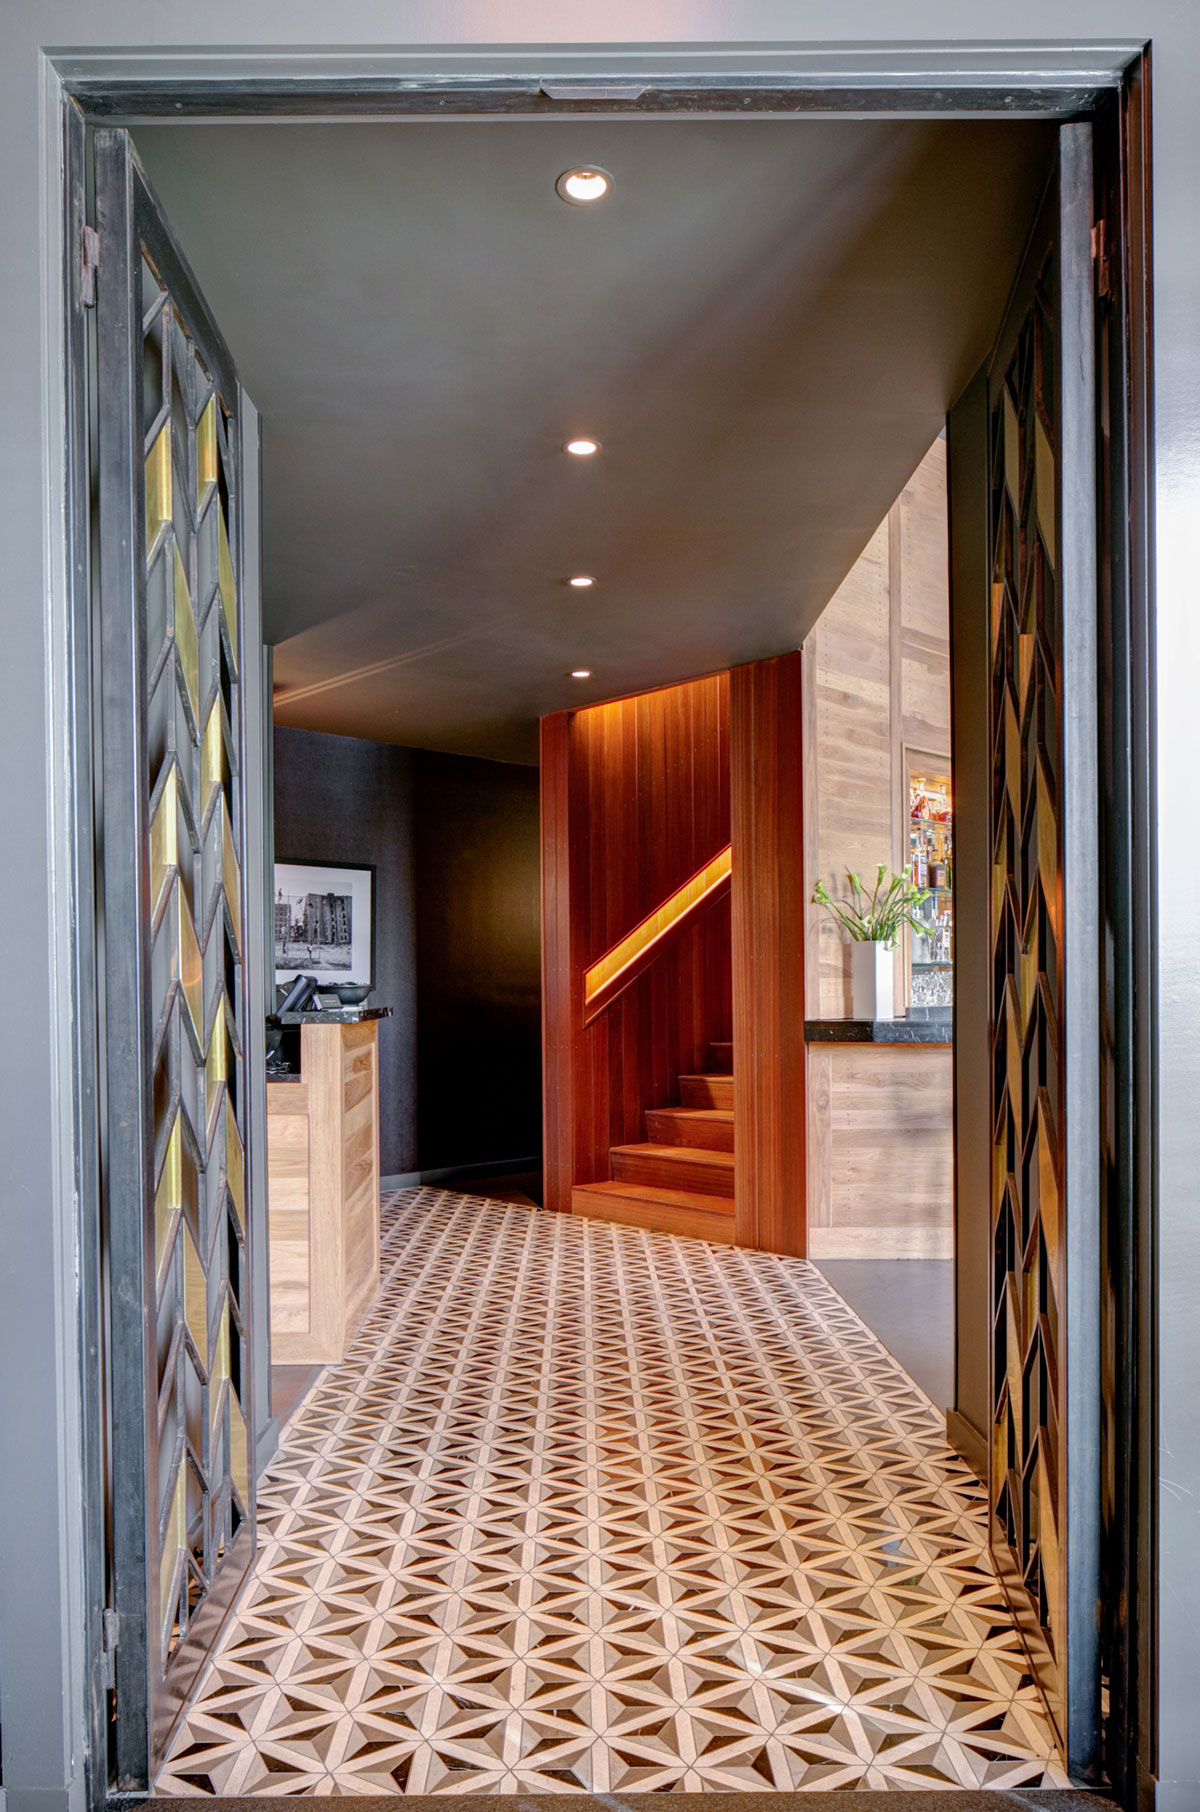 Entrance of the American Cut Bar & Grill project located at 495 Sylvan Avenue in Englewood Cliffs, New Jersey designed by the architecture studio Danny Forster & Architecture